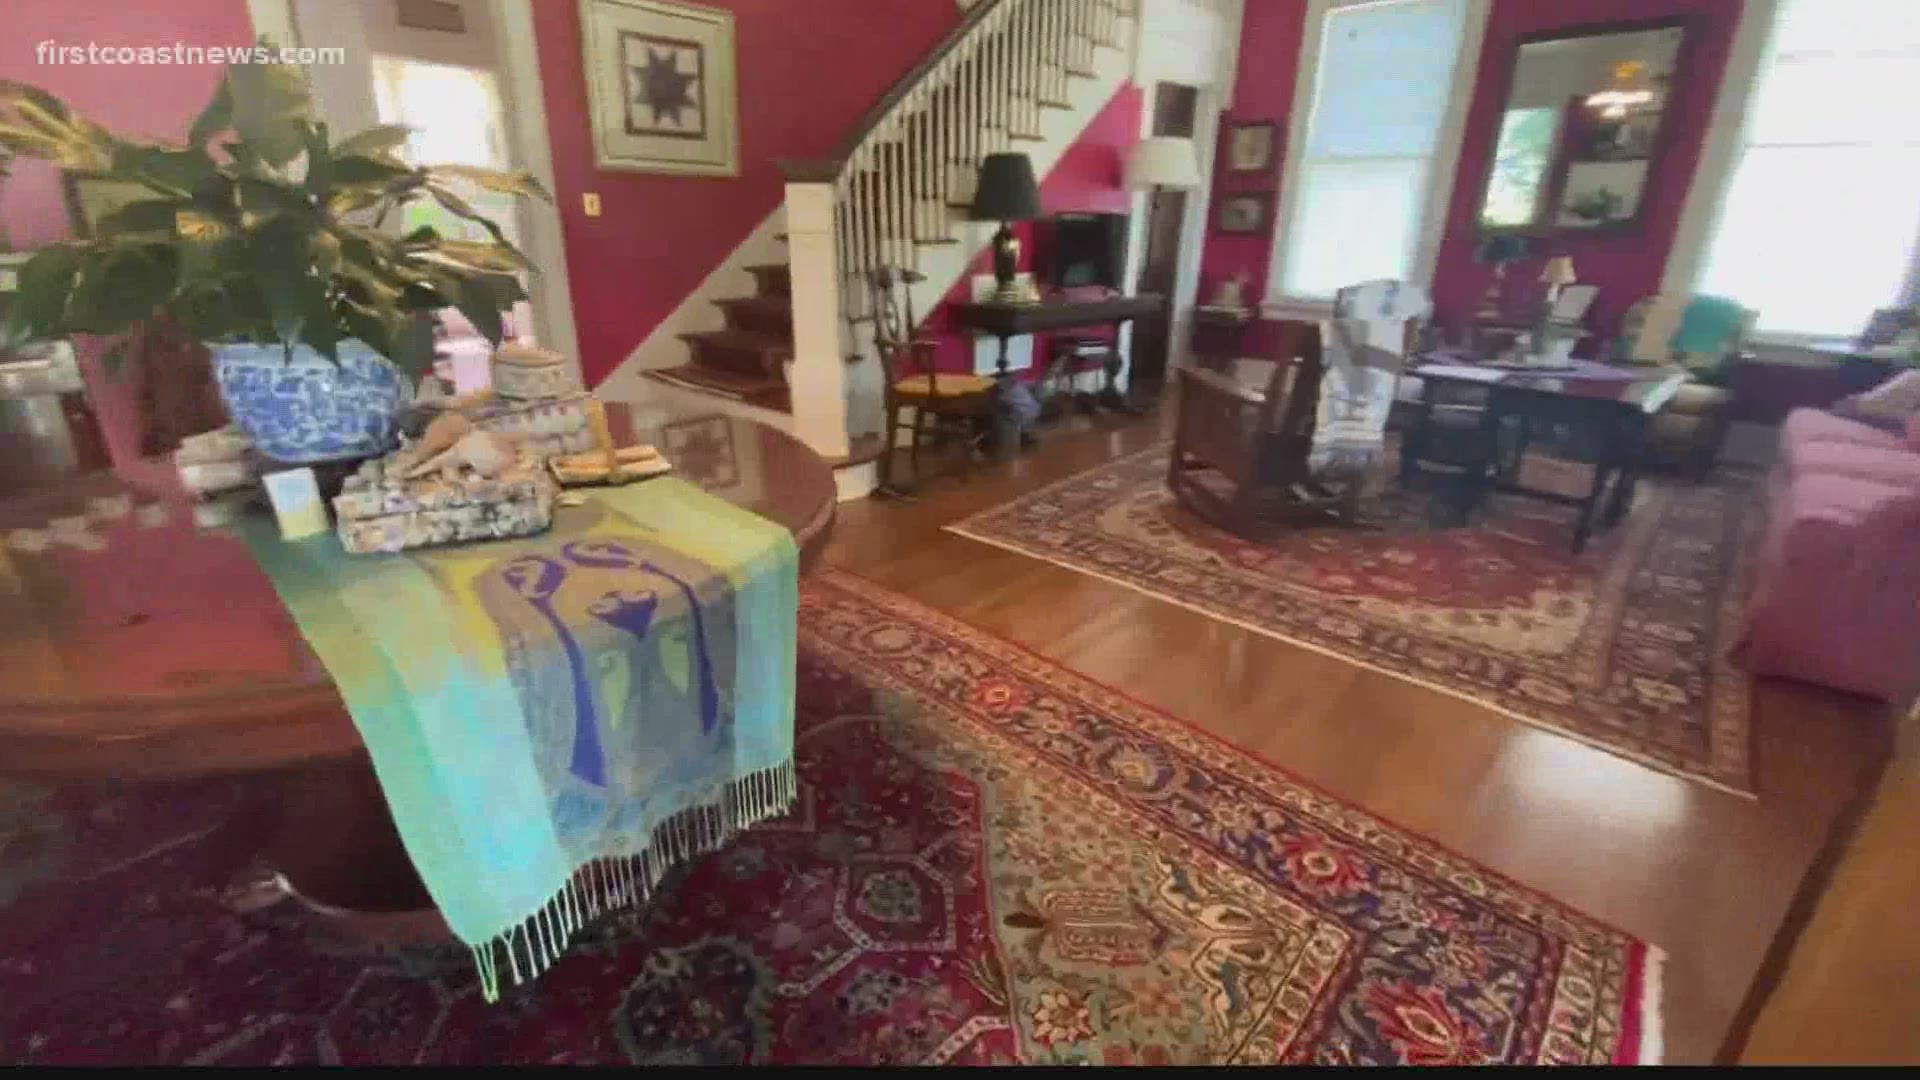 The owners of the St. Johns House Bed and Breakfast will stay closed for now. They live in the house and Florida law requires them to be closed for half the year.